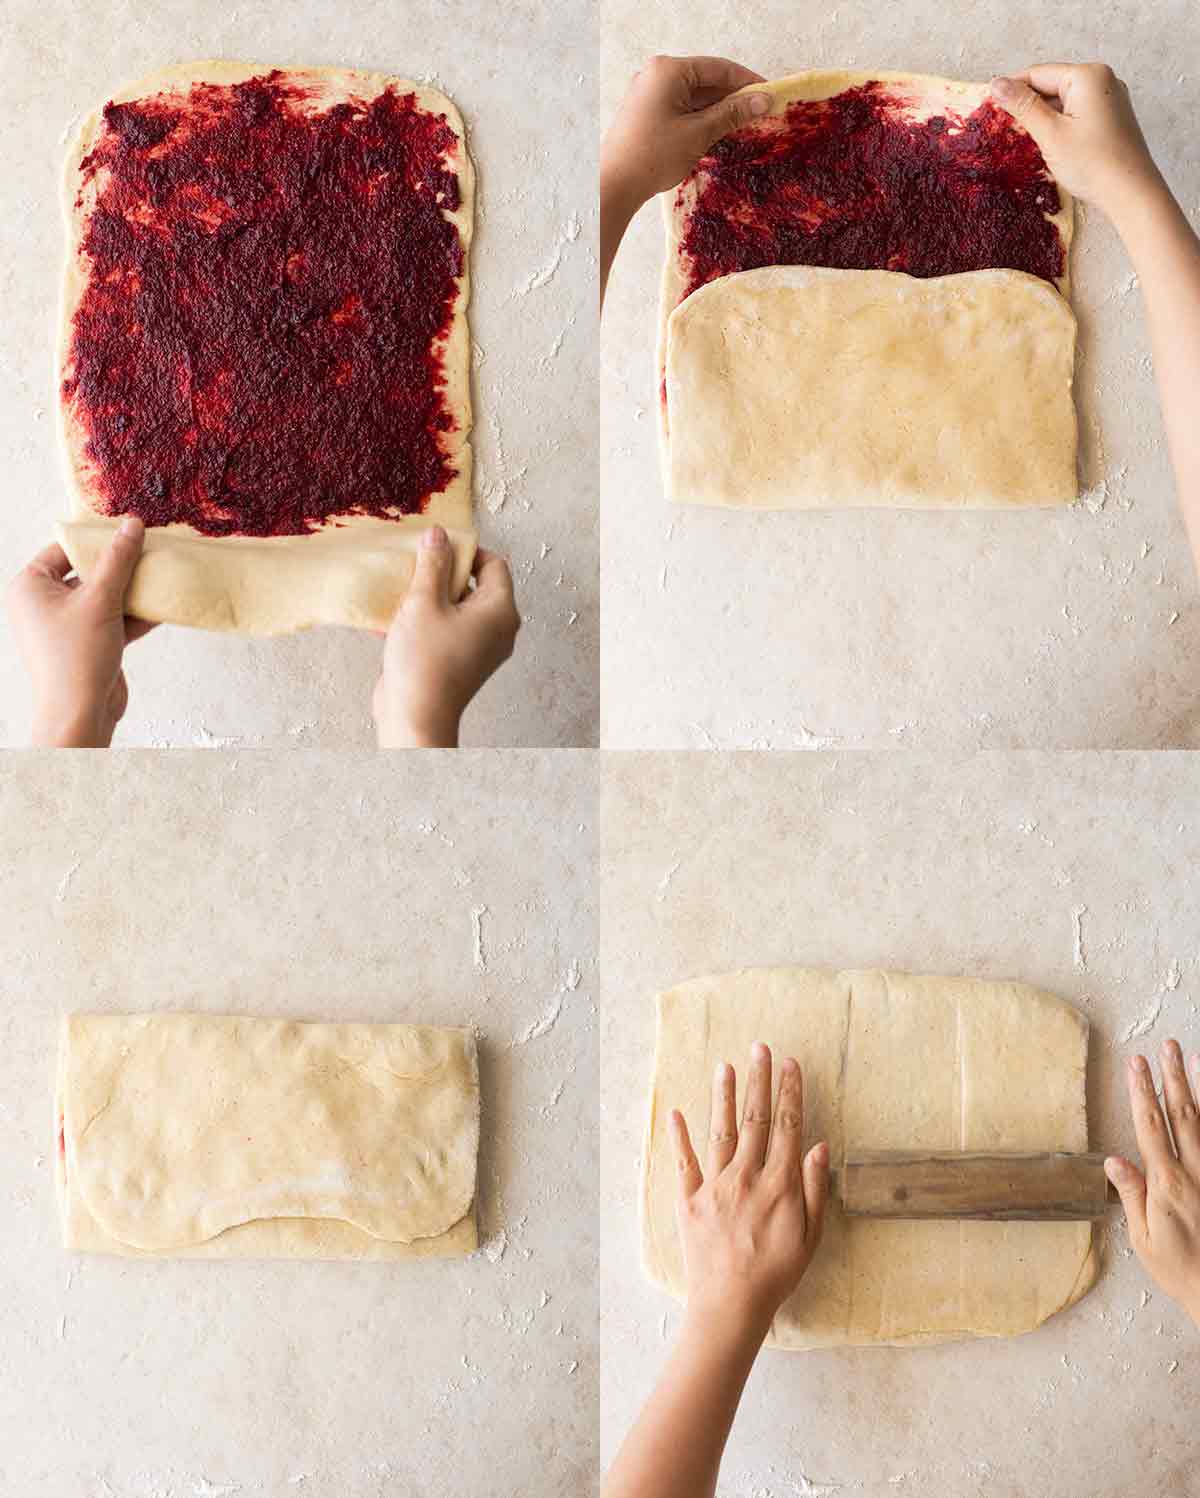 Four image collage showing the folding process for the cherry roll dough. Last image shows the dough being rolled out into a rectangle again.